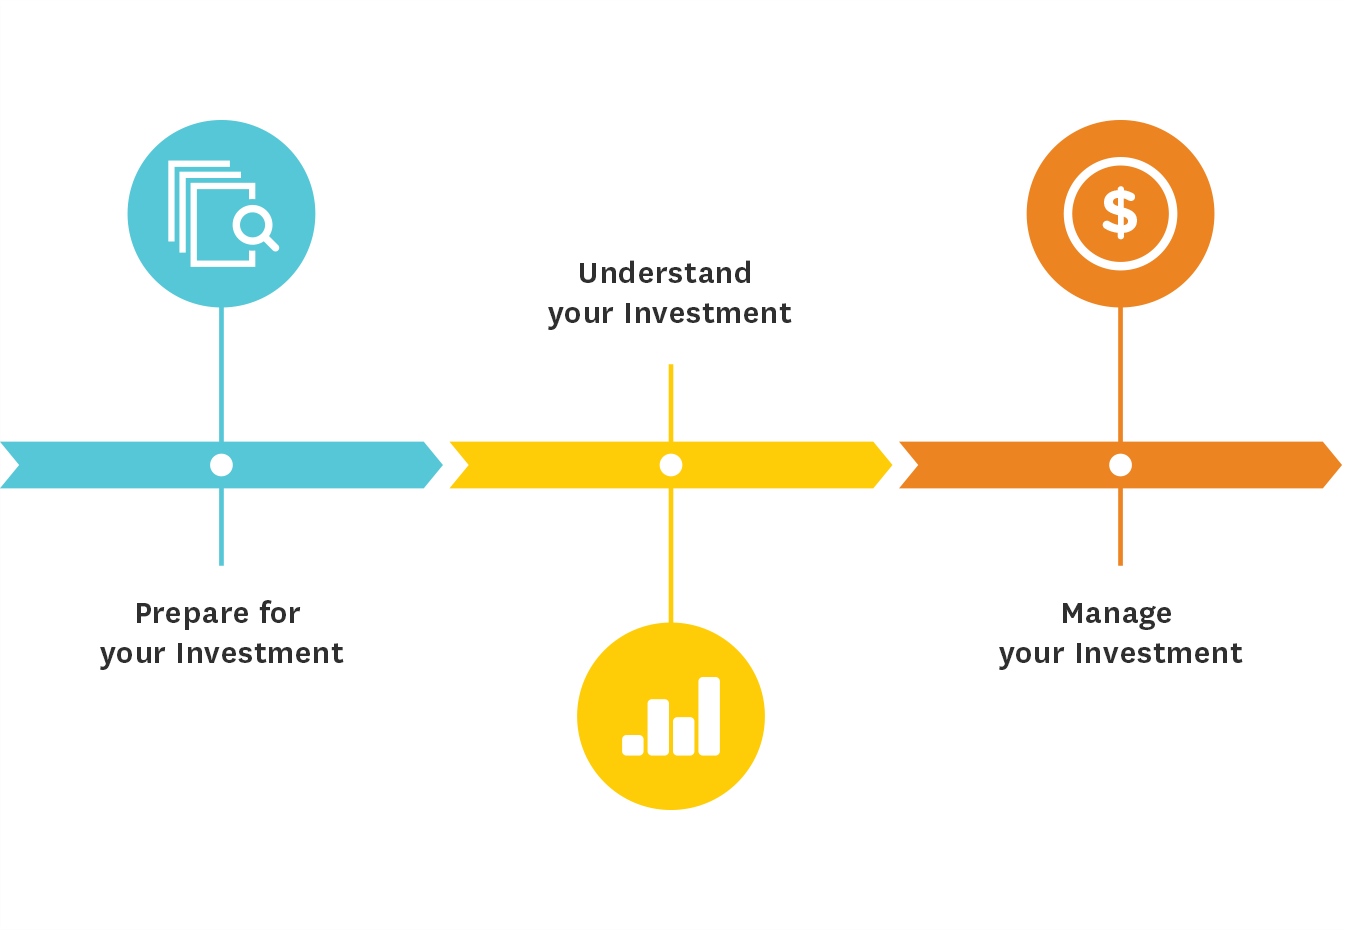 Prepare for your investment. Understand your investment. Manage your investment.